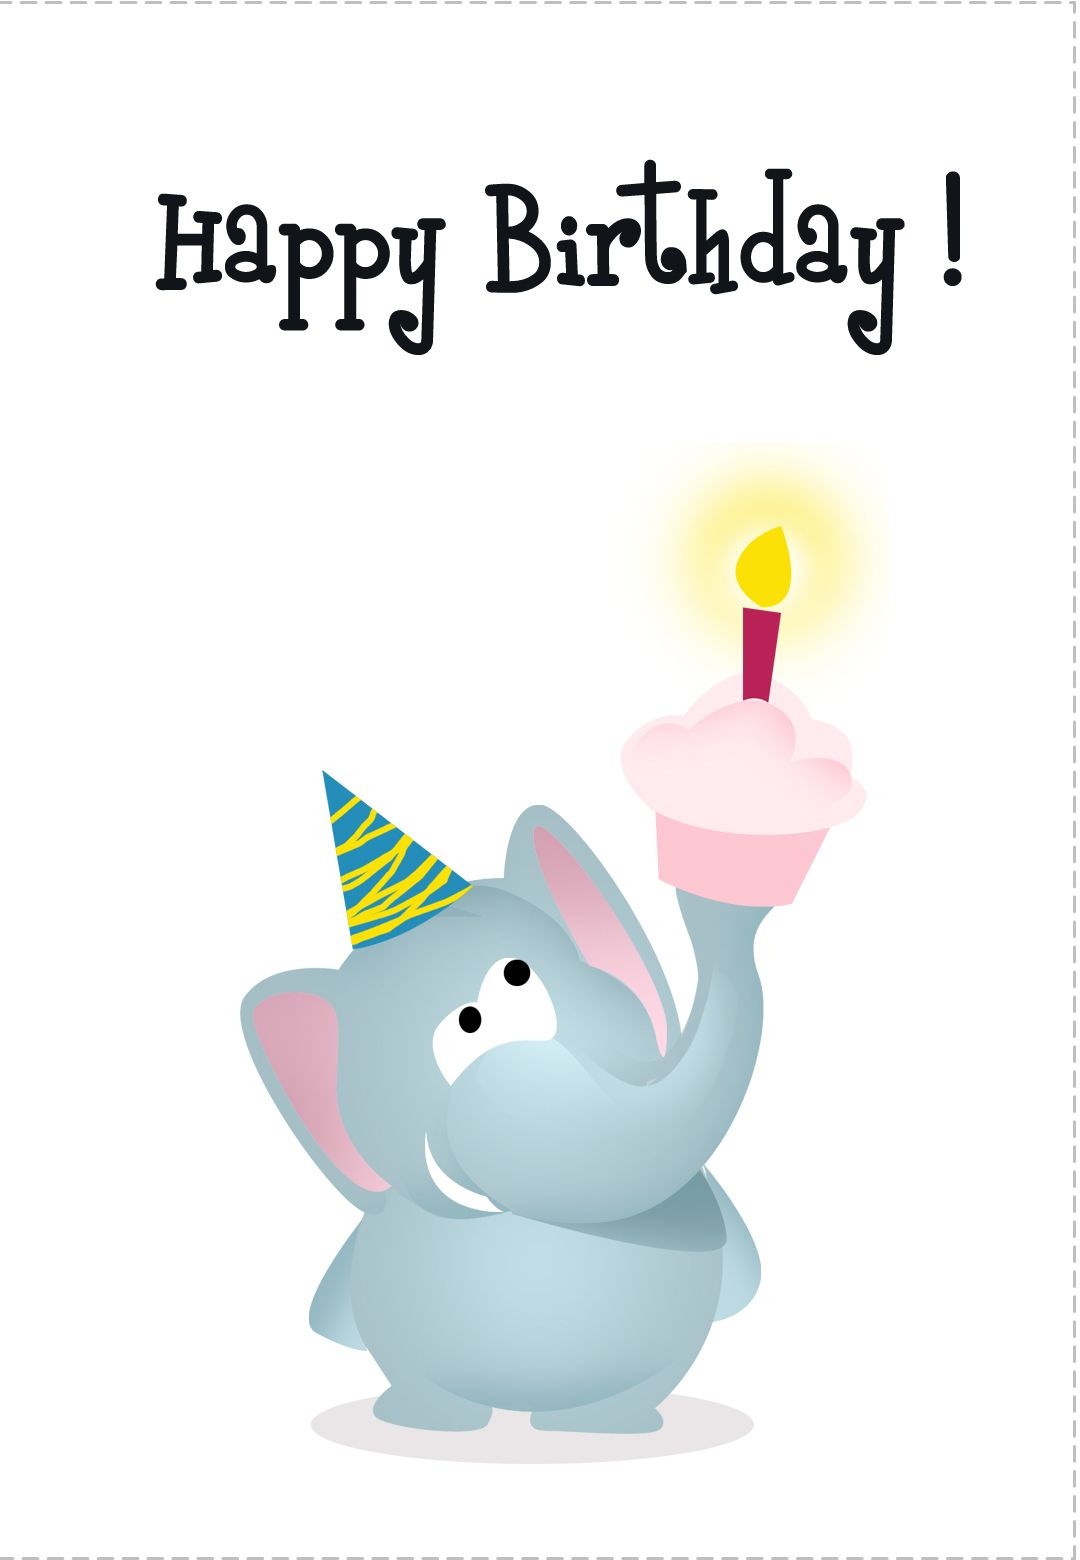 Free Printable Greeting Cards Of All Kinds. With Matching Printable - Free Printable Birthday Cards For Kids